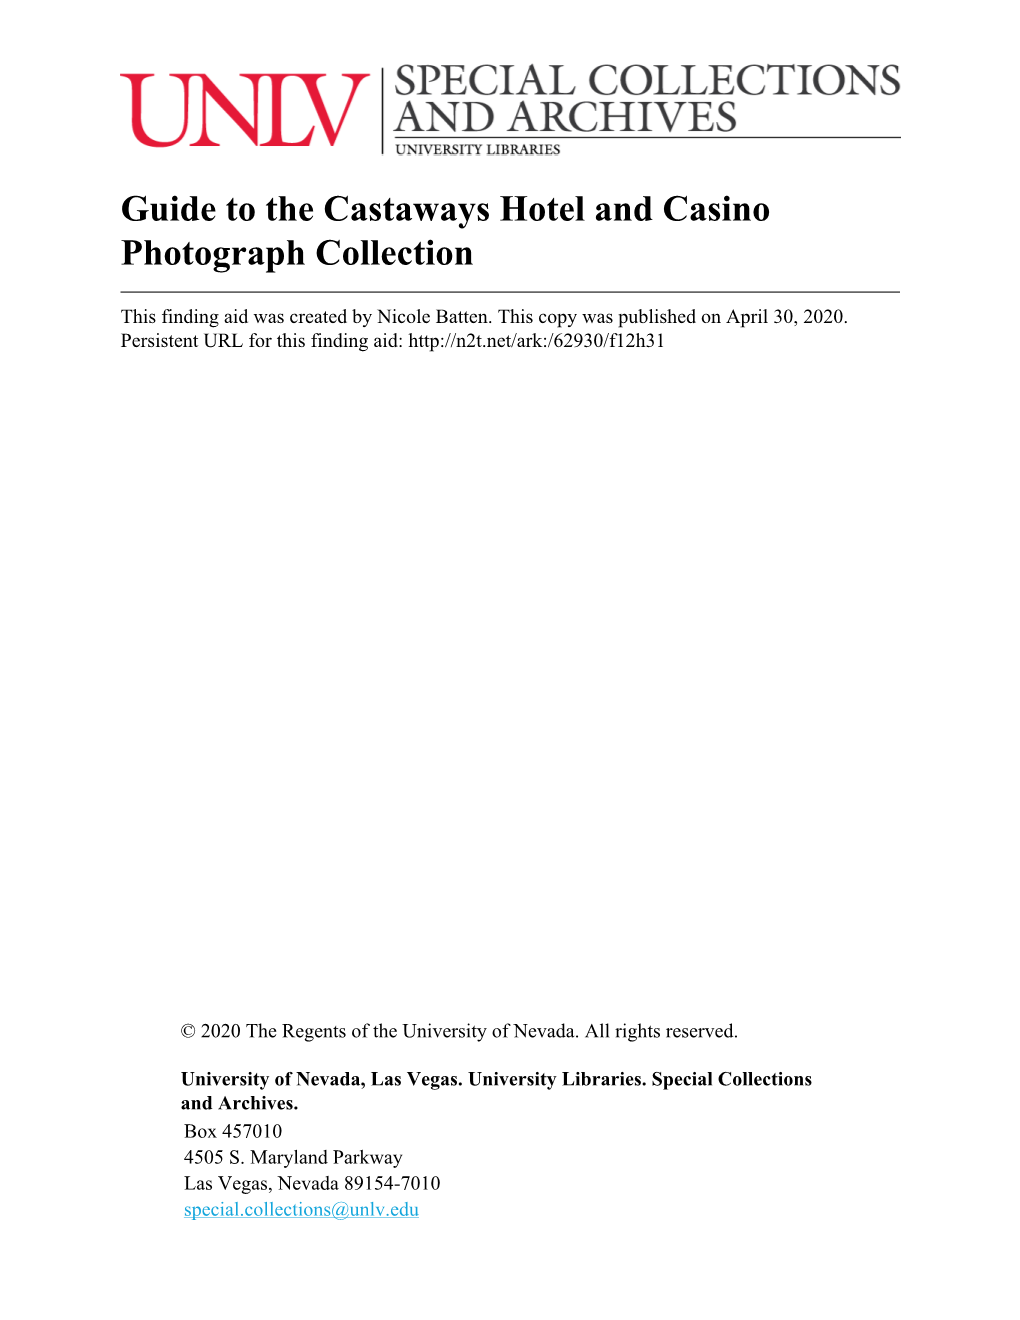 Guide to the Castaways Hotel and Casino Photograph Collection